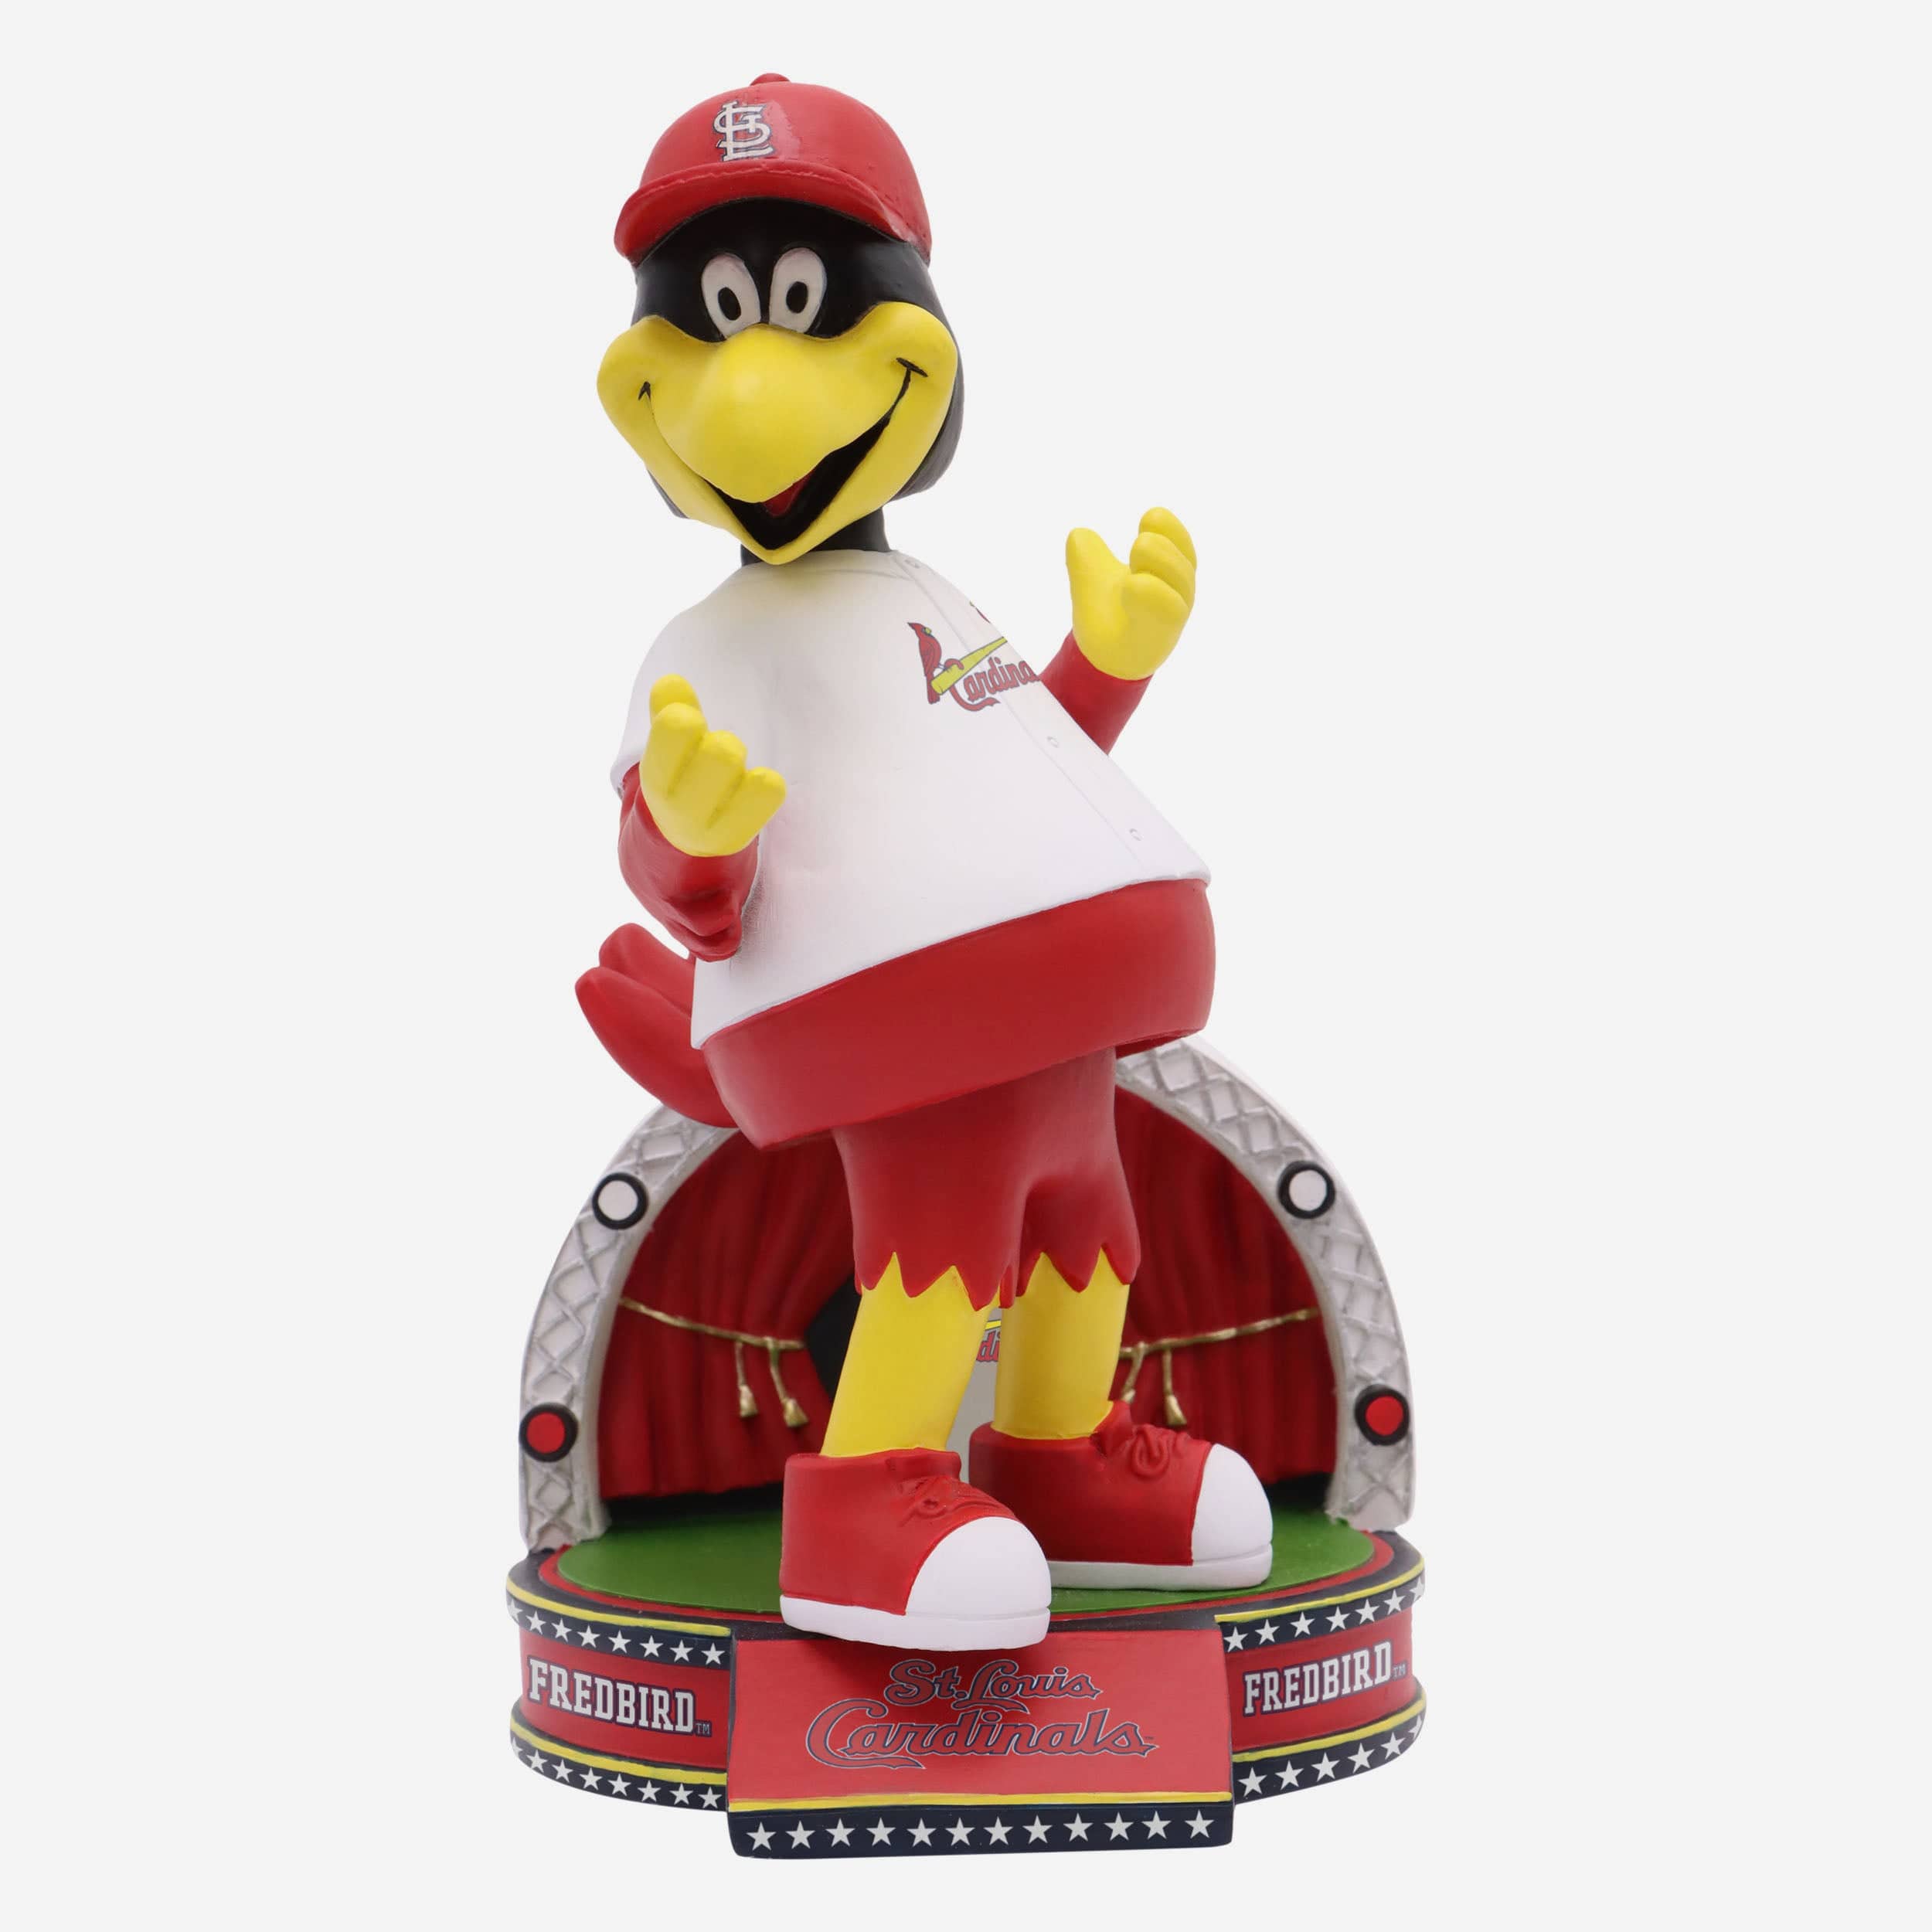 Fredbird St Louis Cardinals Bobble Belly Mascot Bobblehead Officially Licensed by MLB